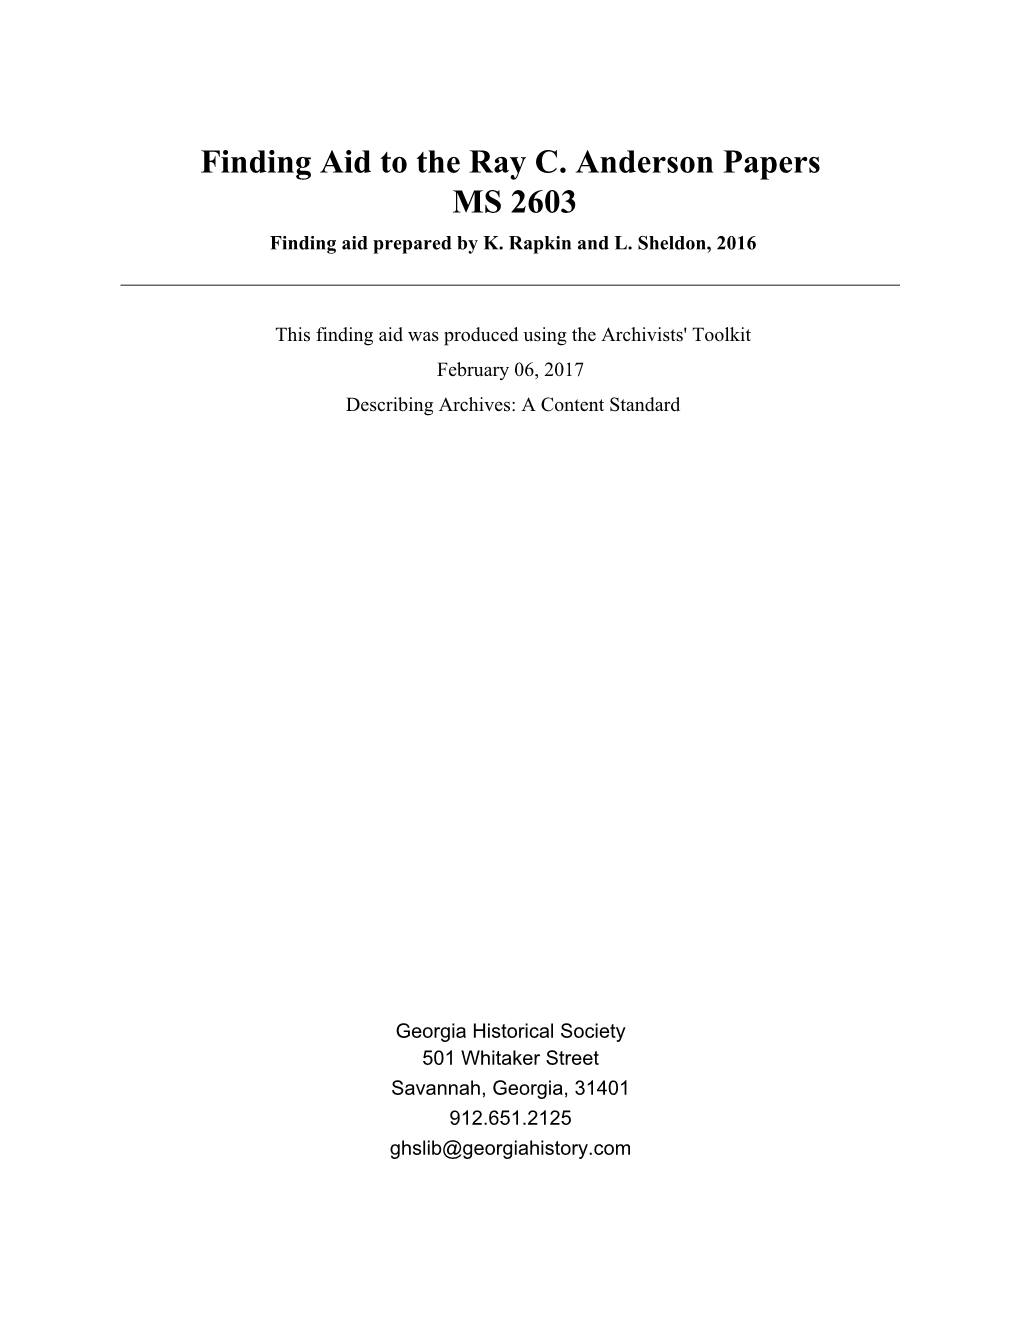 Finding Aid to the Ray C. Anderson Papers MS 2603 Finding Aid Prepared by K